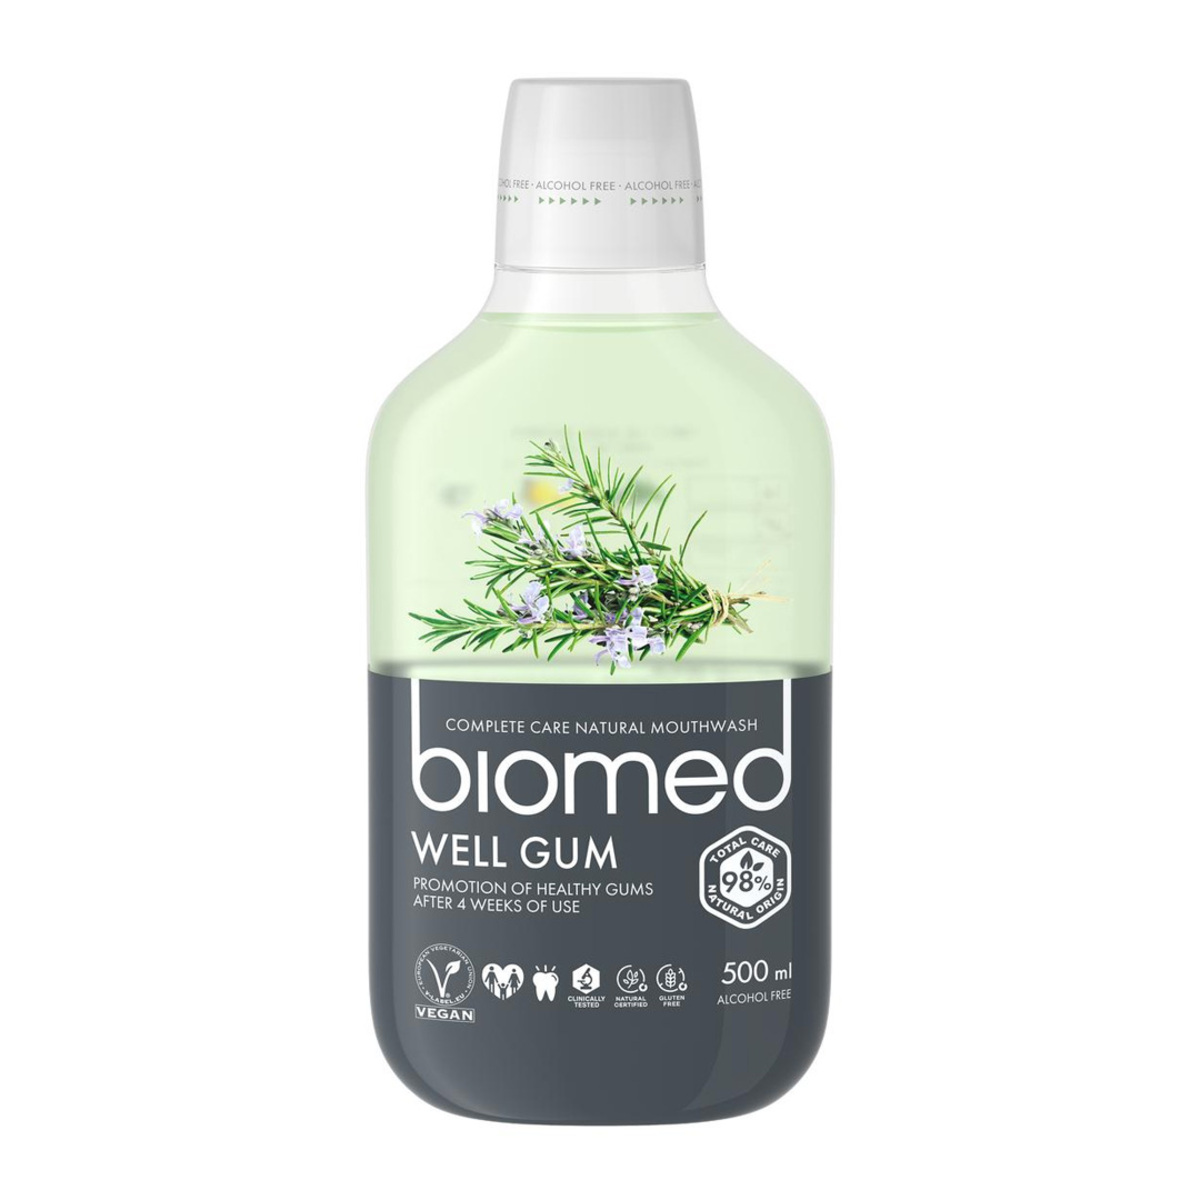 Biomed Mouthwash Well Gum 500ml